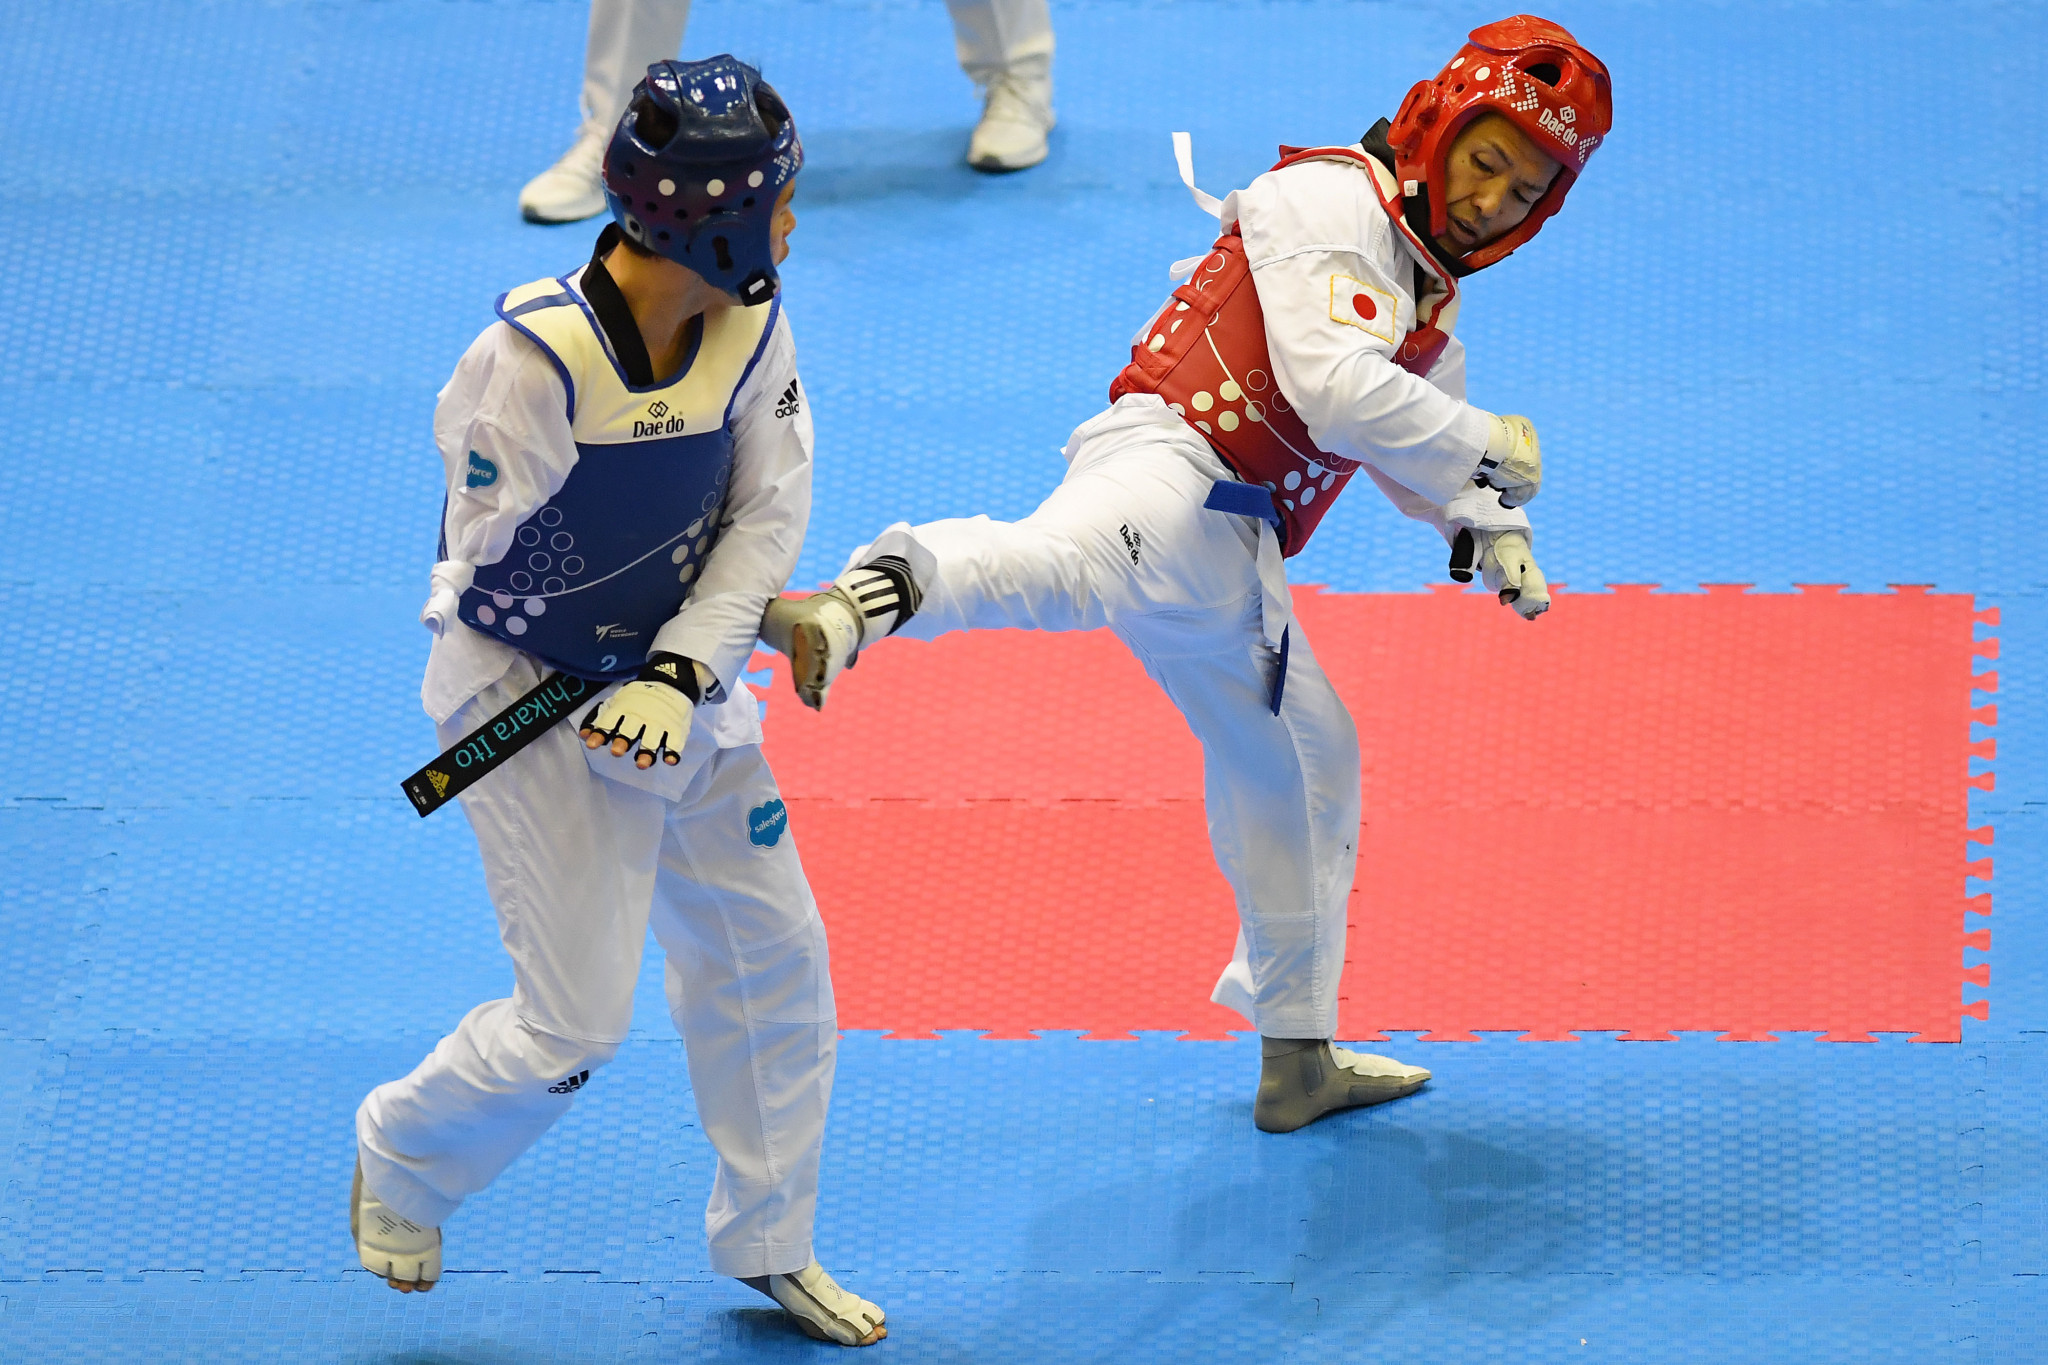 Taekwondo will debut at the Paralympic Games this year ©Getty Images